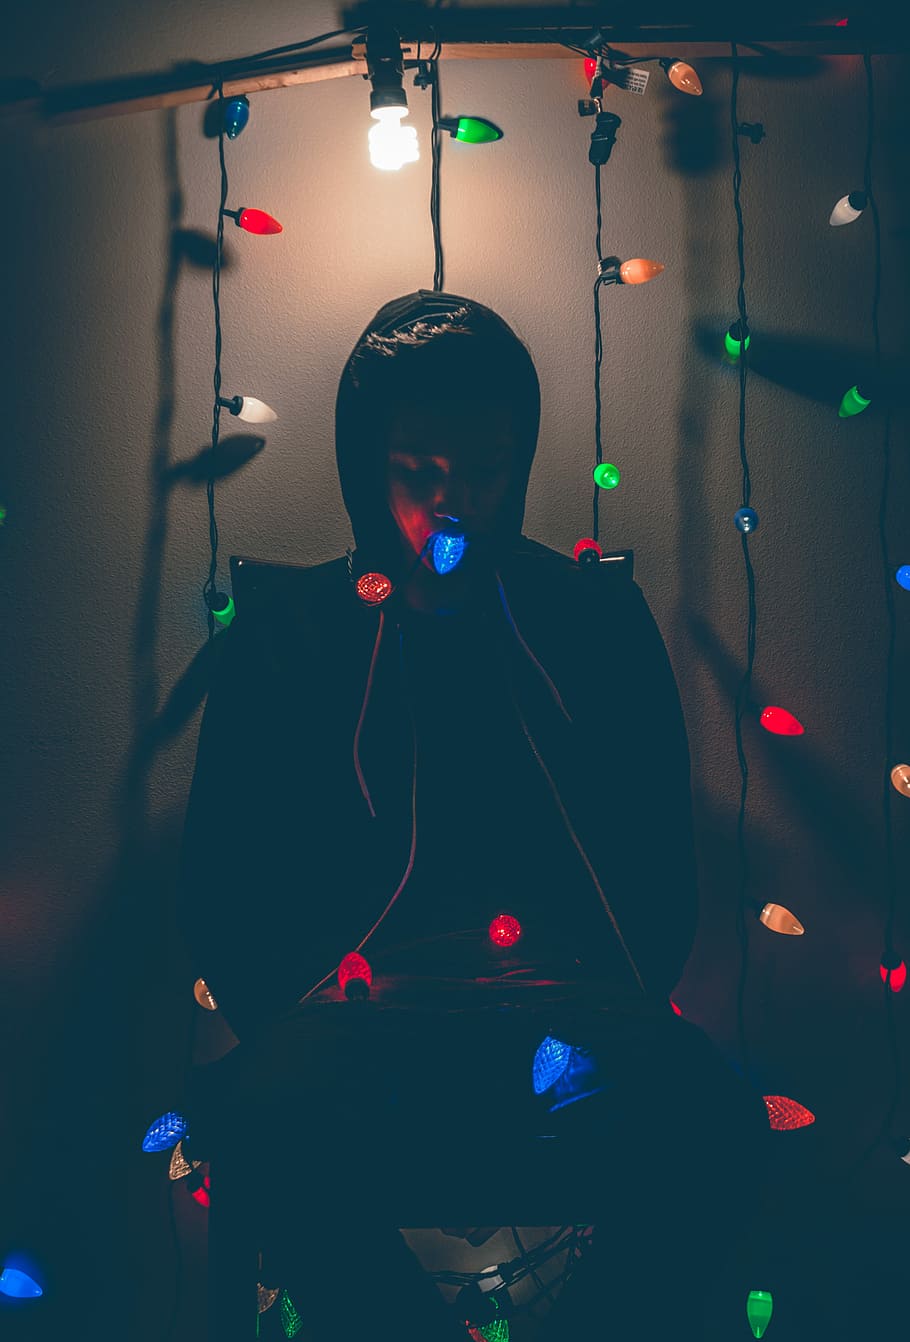 man sitting while biting multicolored string lights, person wearing black hoodie standing behind string lights